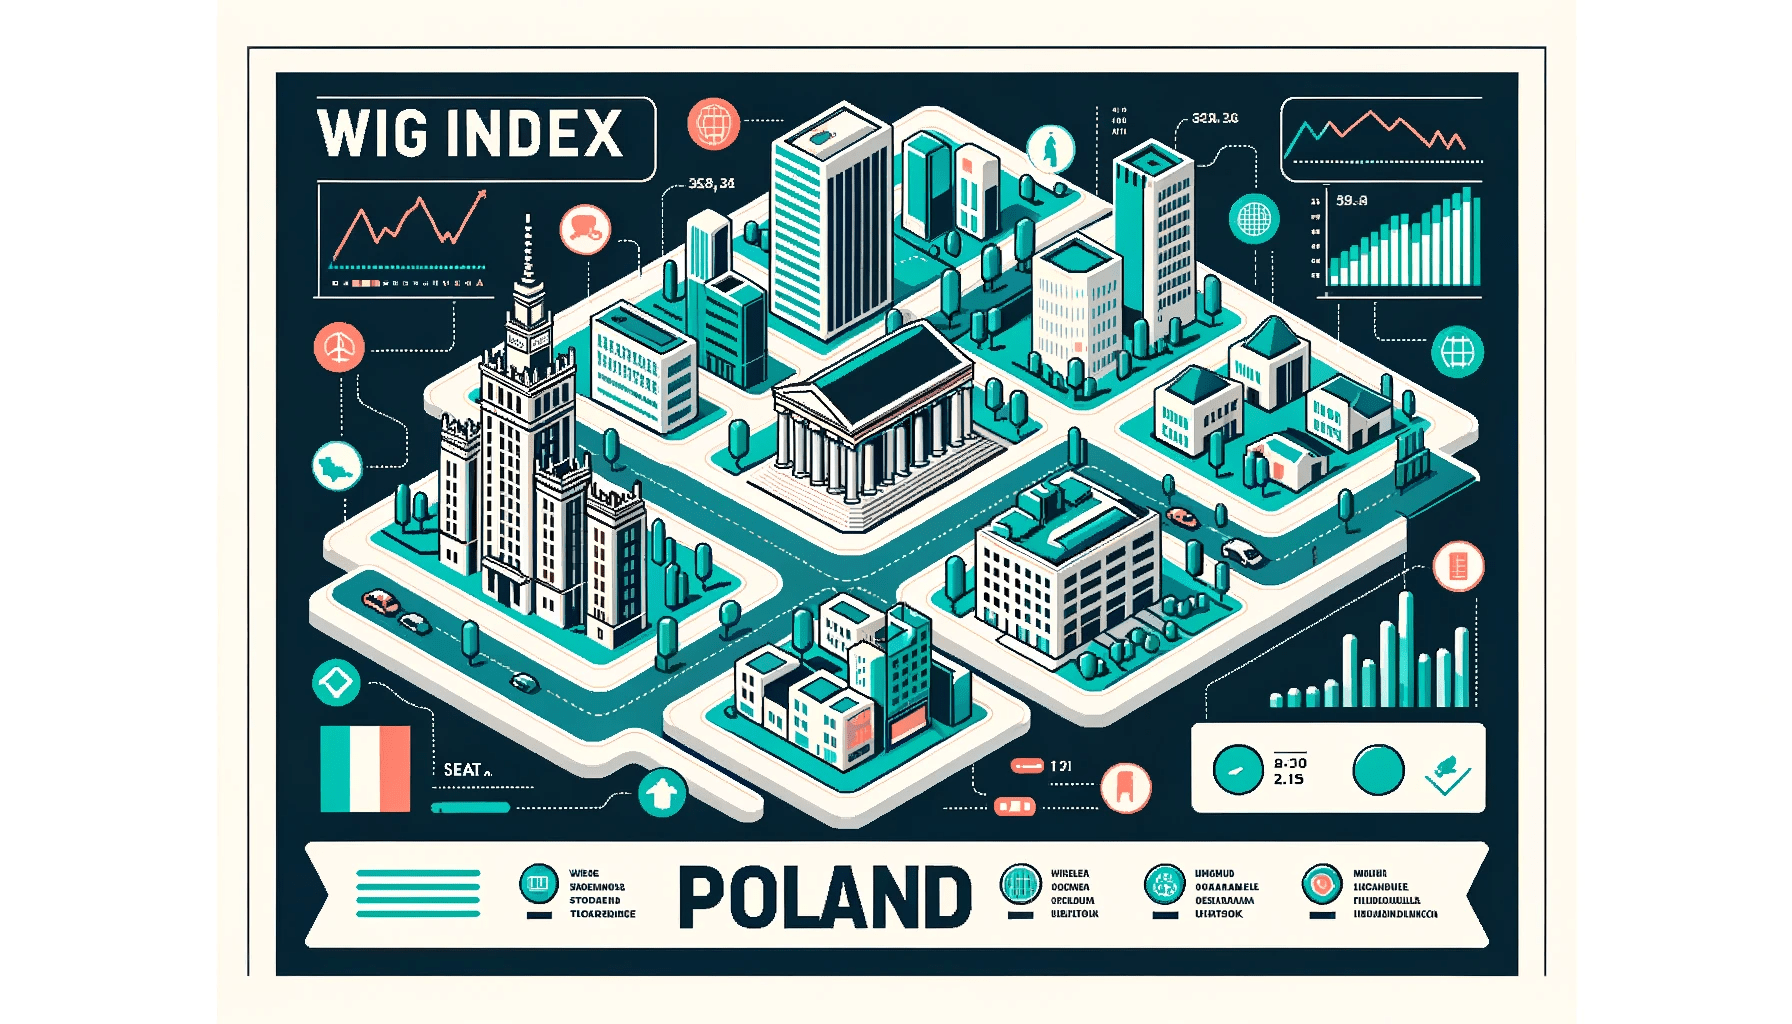 DALL·E 2023 10 16 22.53.46 Vector illustration of a simplified and stylized map of the WIG INDEX Poland stock exchange area. Key buildings are represented with icons and there min - A Comprehensive Guide To The WIG Index: History & Comparison - seat11a -%sitename%